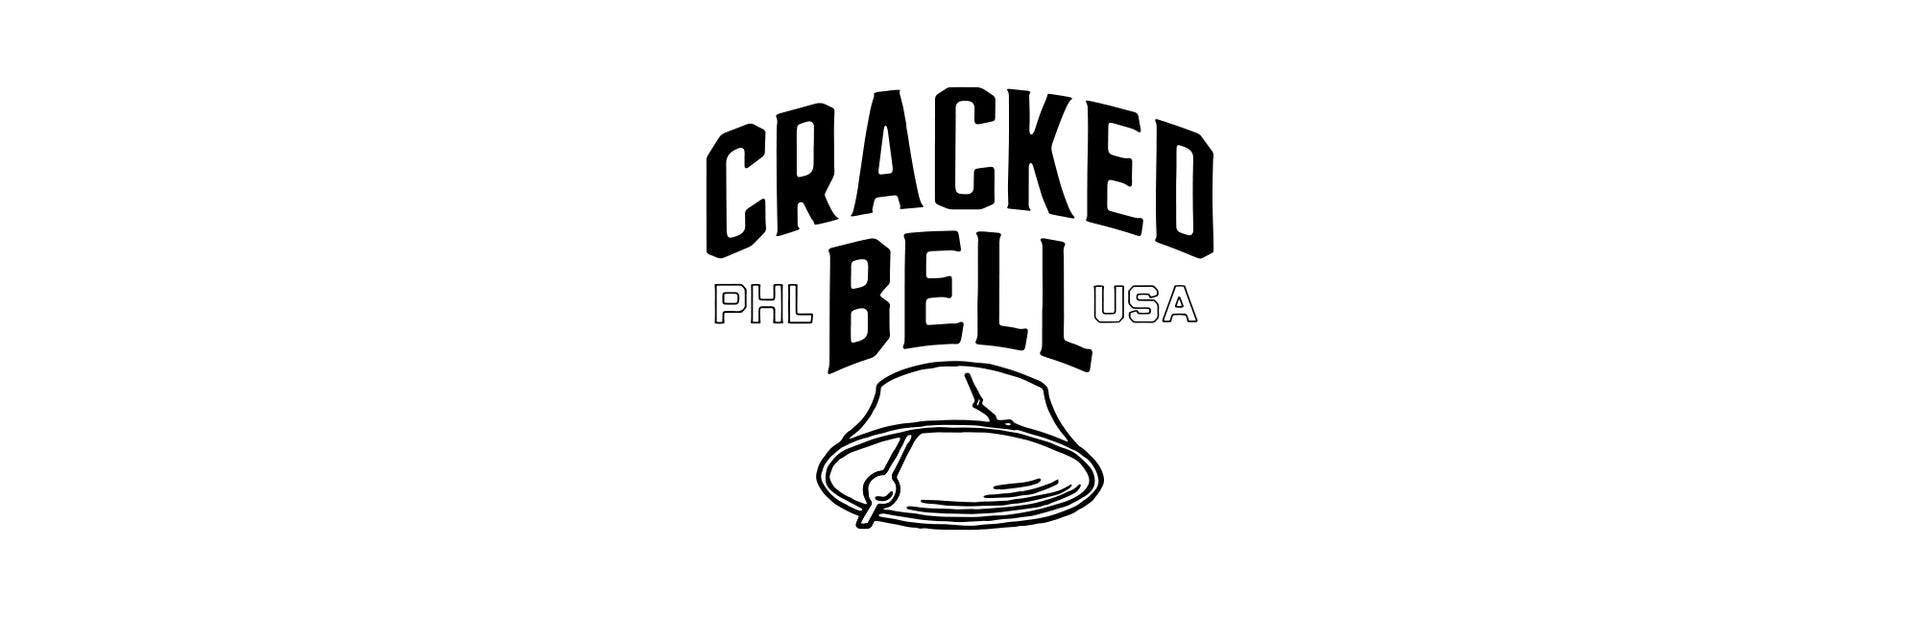 Cracked Bell